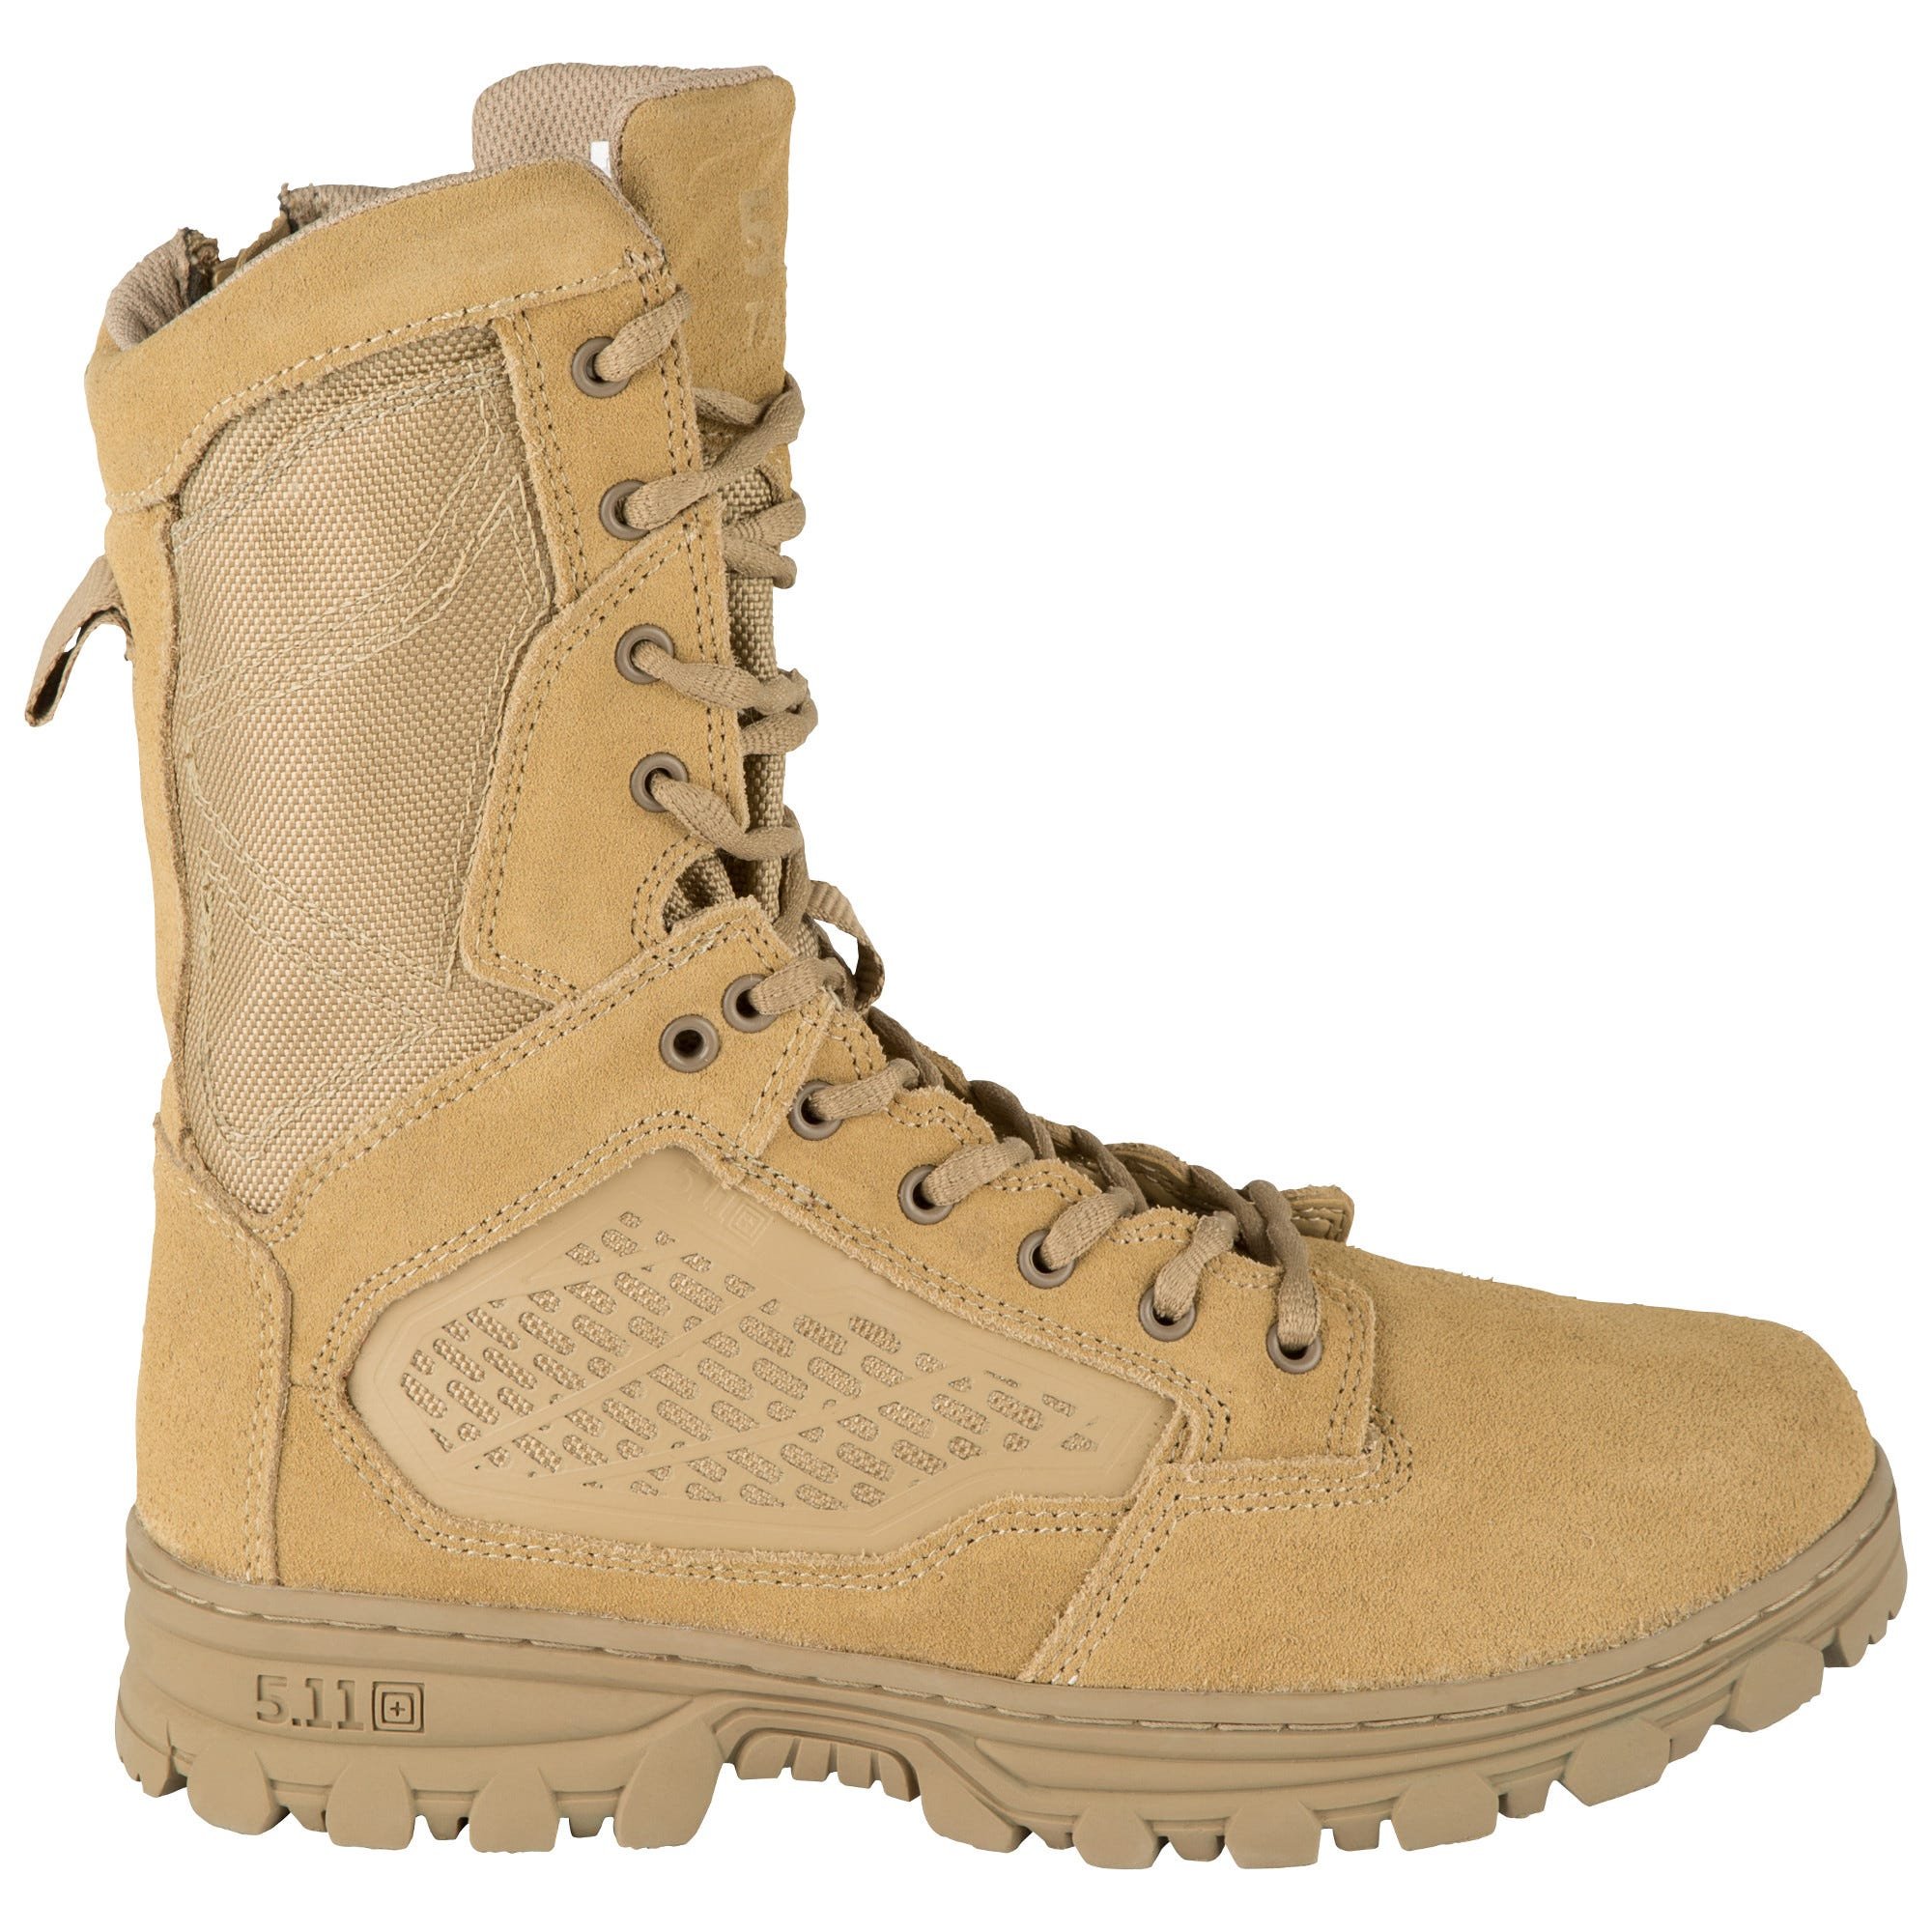 5.11 Work Gear EVO 8-Inch Waterproof Boots, Oil/Slip-Resistant, OrthoLite Insole, Coyote, 6.5/Regular, Style 12347 - image 3 of 4